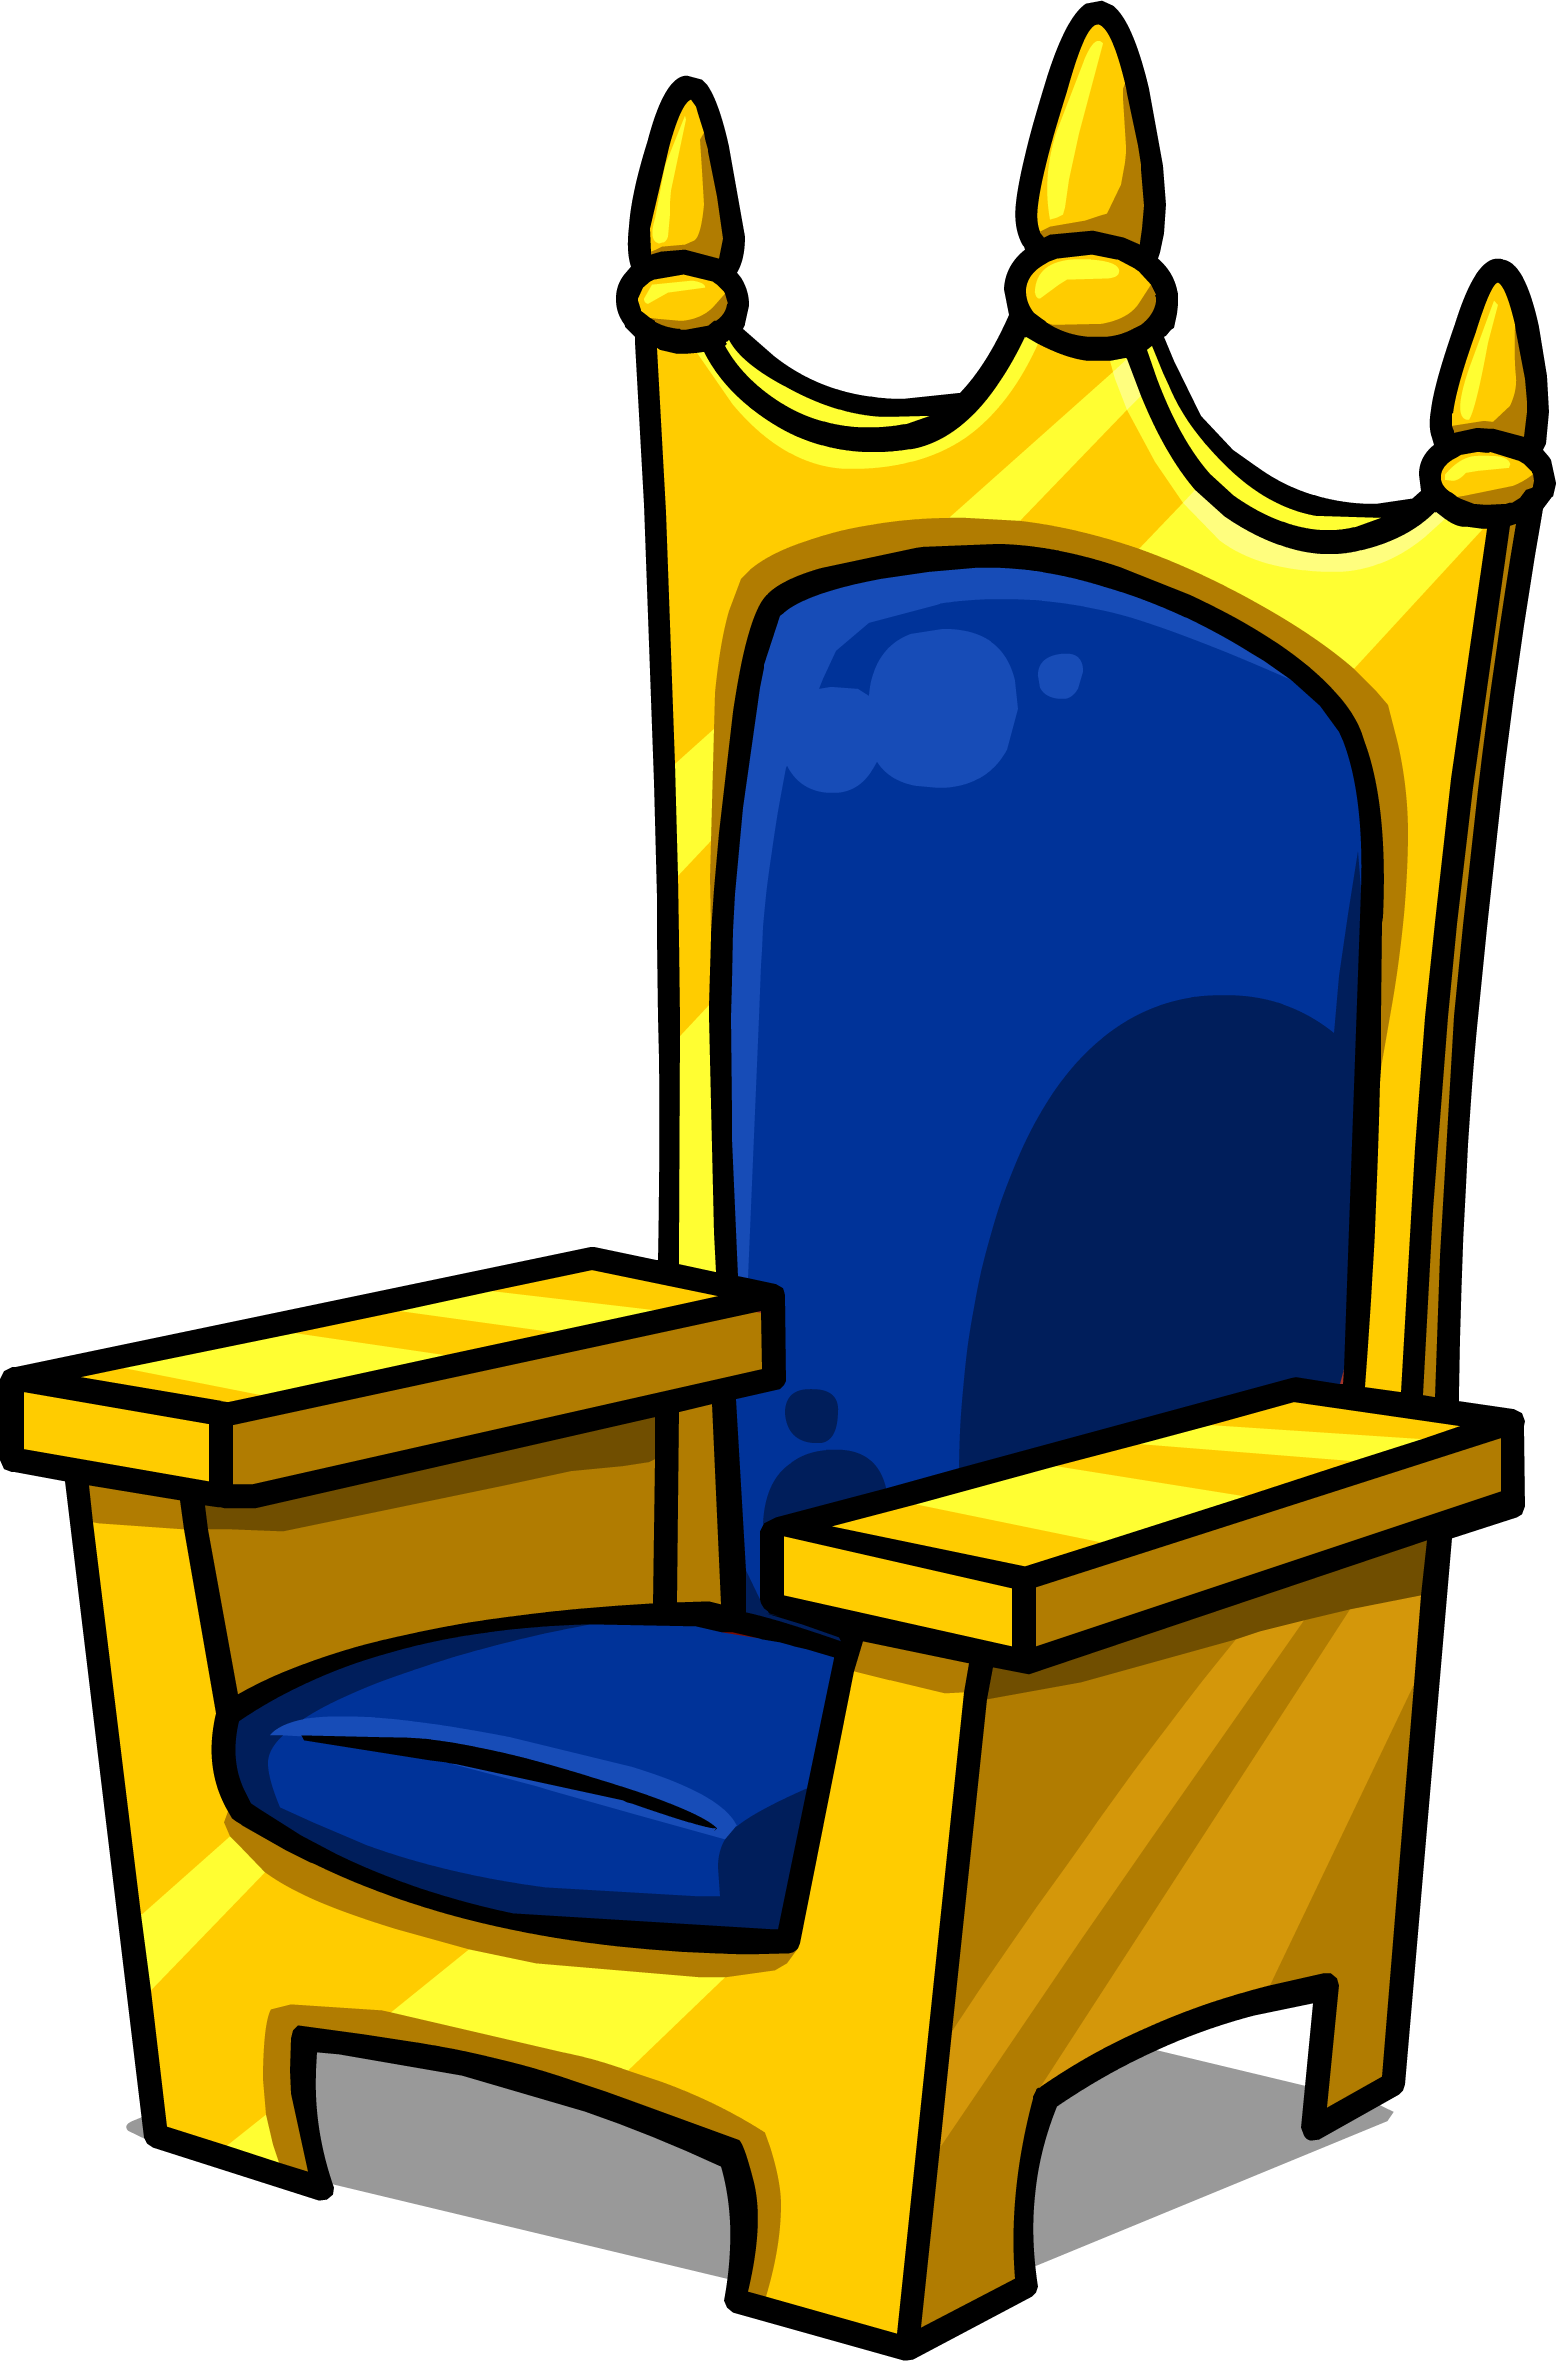 Royal Throne Id 849 Sprite 002 - Throne Clipart Png (1556x2361)